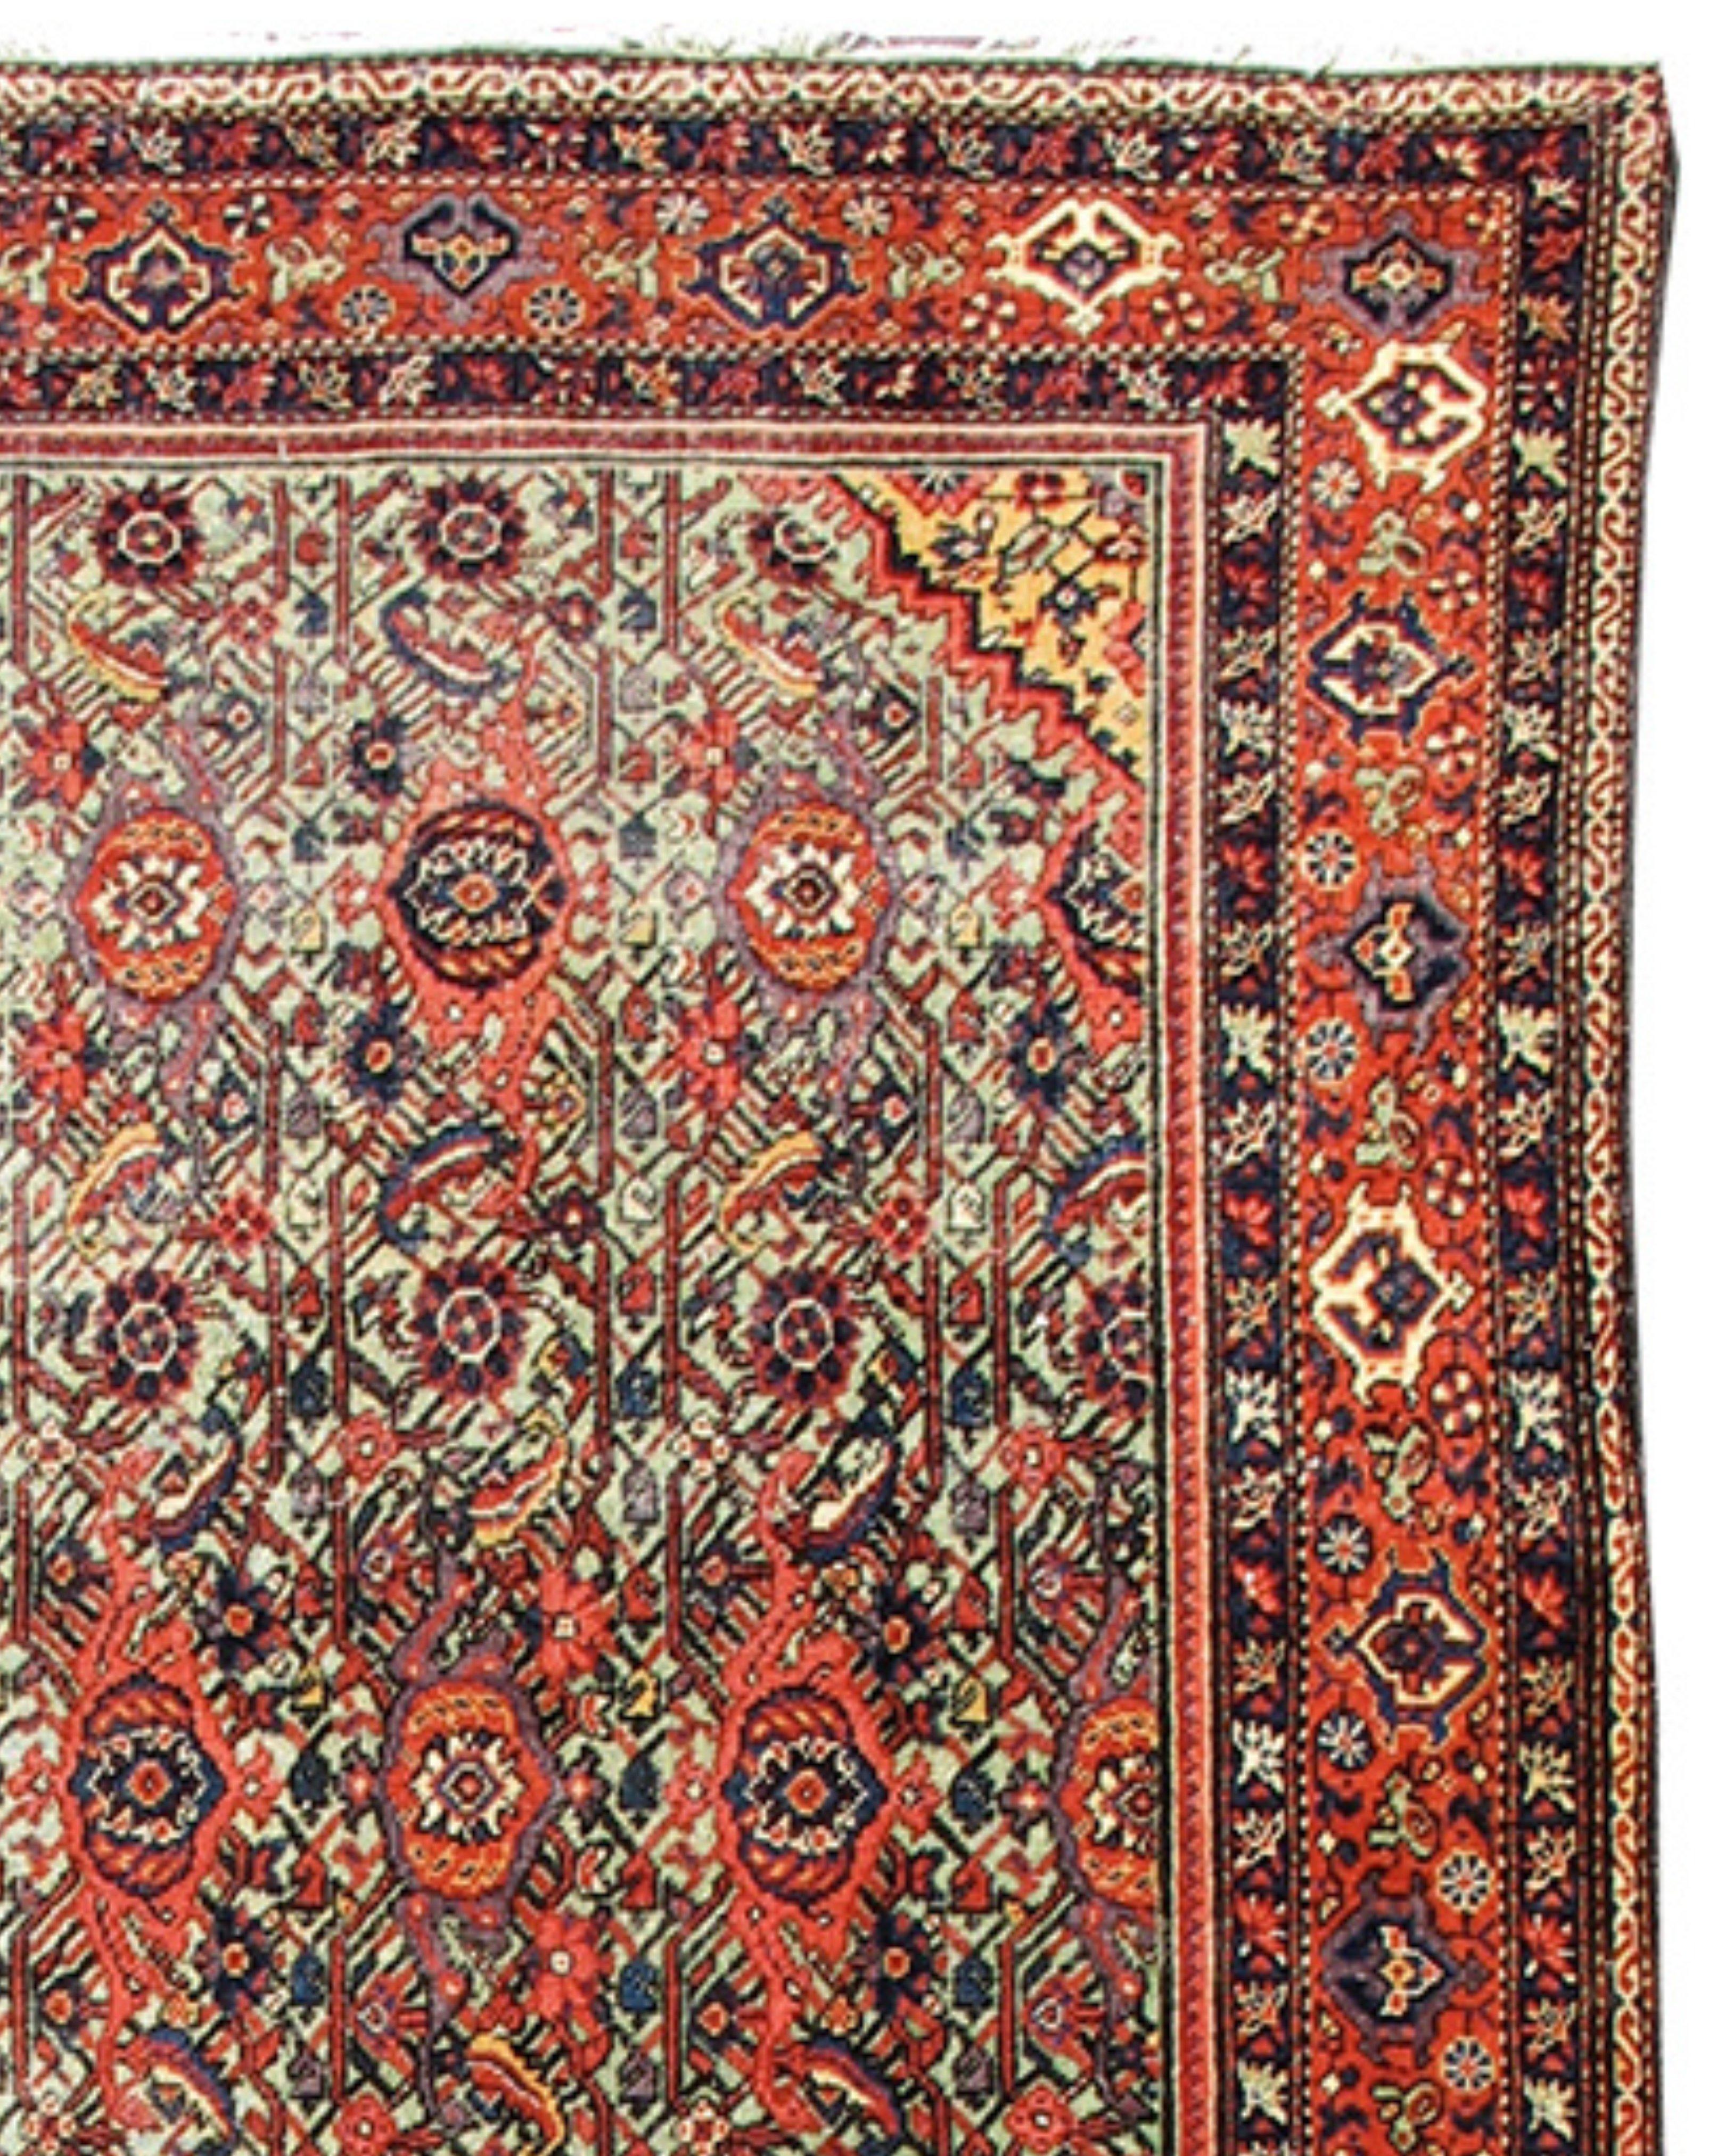 Antique Fereghan Rug, 19th Century

Additional Information:
Dimensions: 4'4